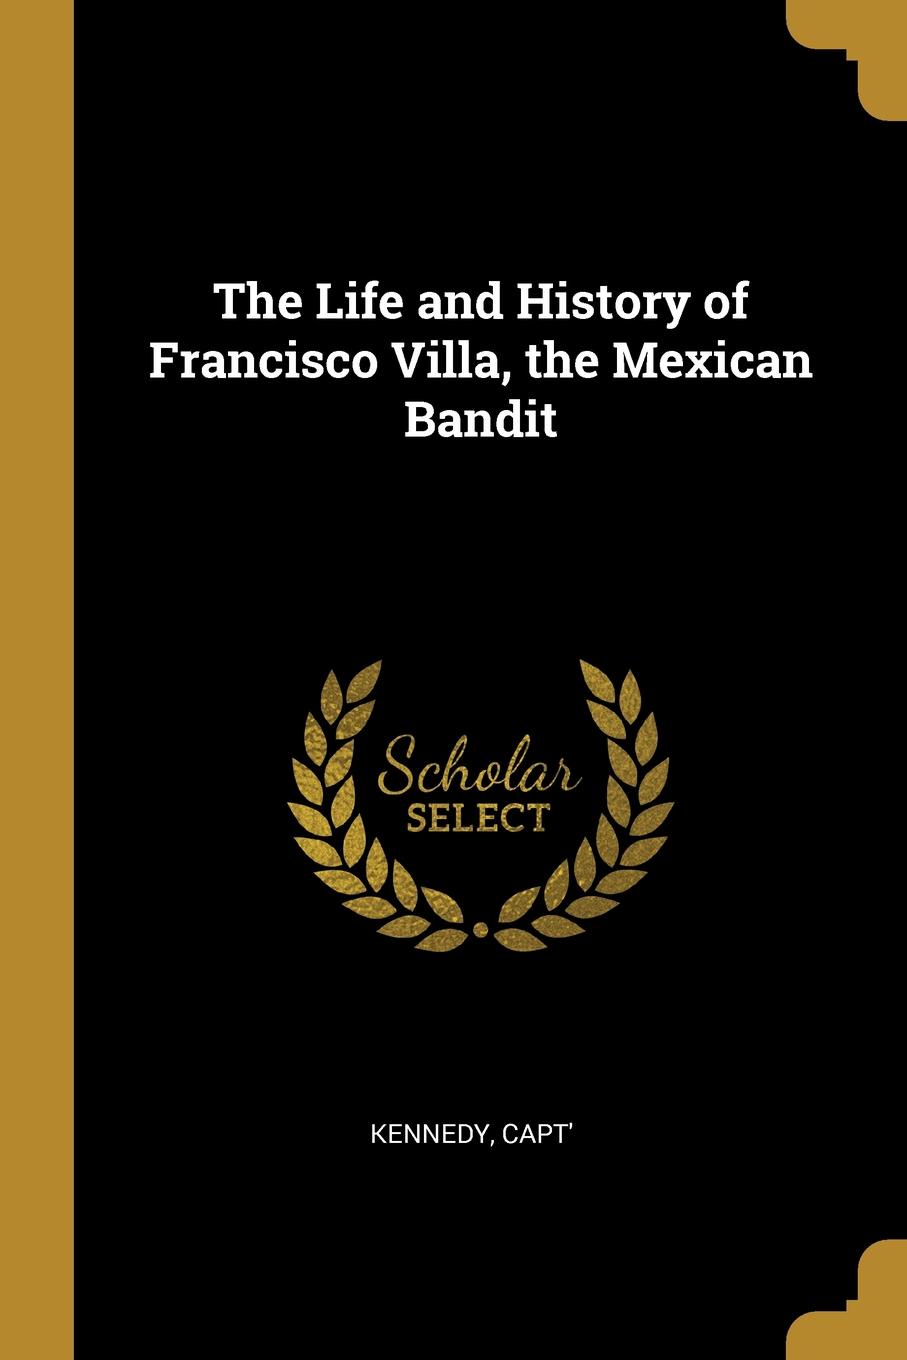 The Life and History of Francisco Villa, the Mexican Bandit